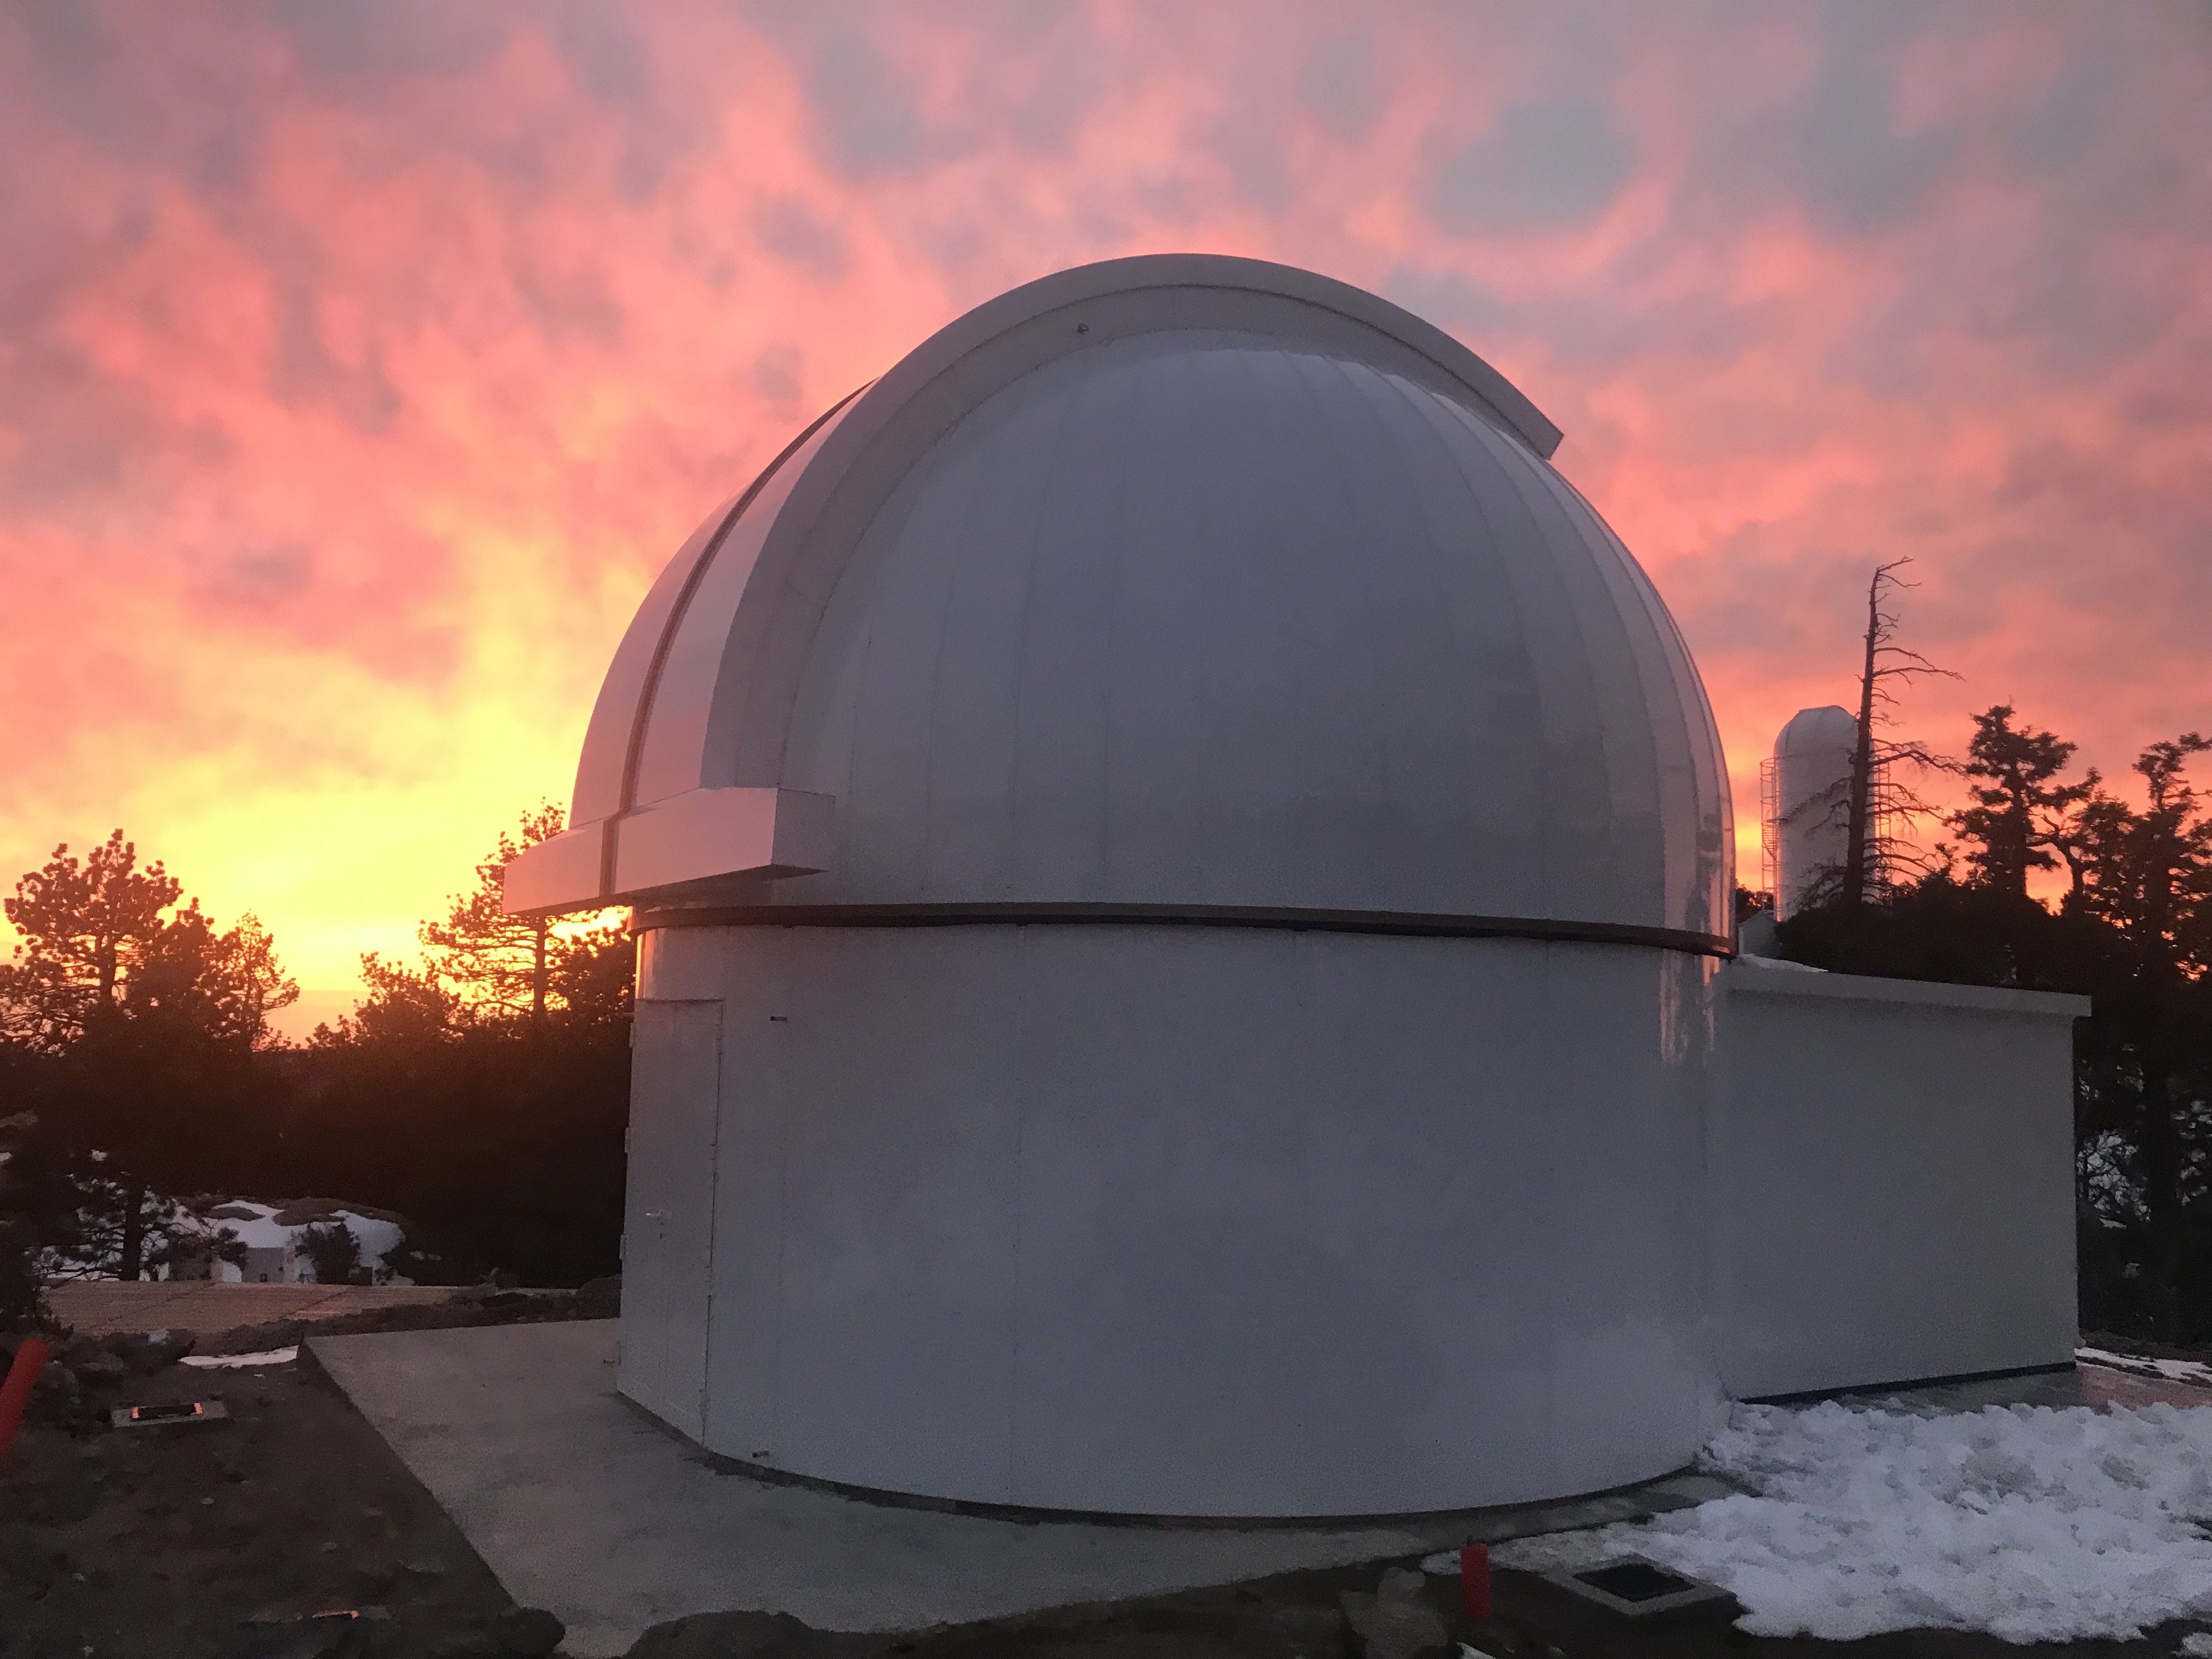 SAINT-EX Observatory at dusk (picture B. Courcol)